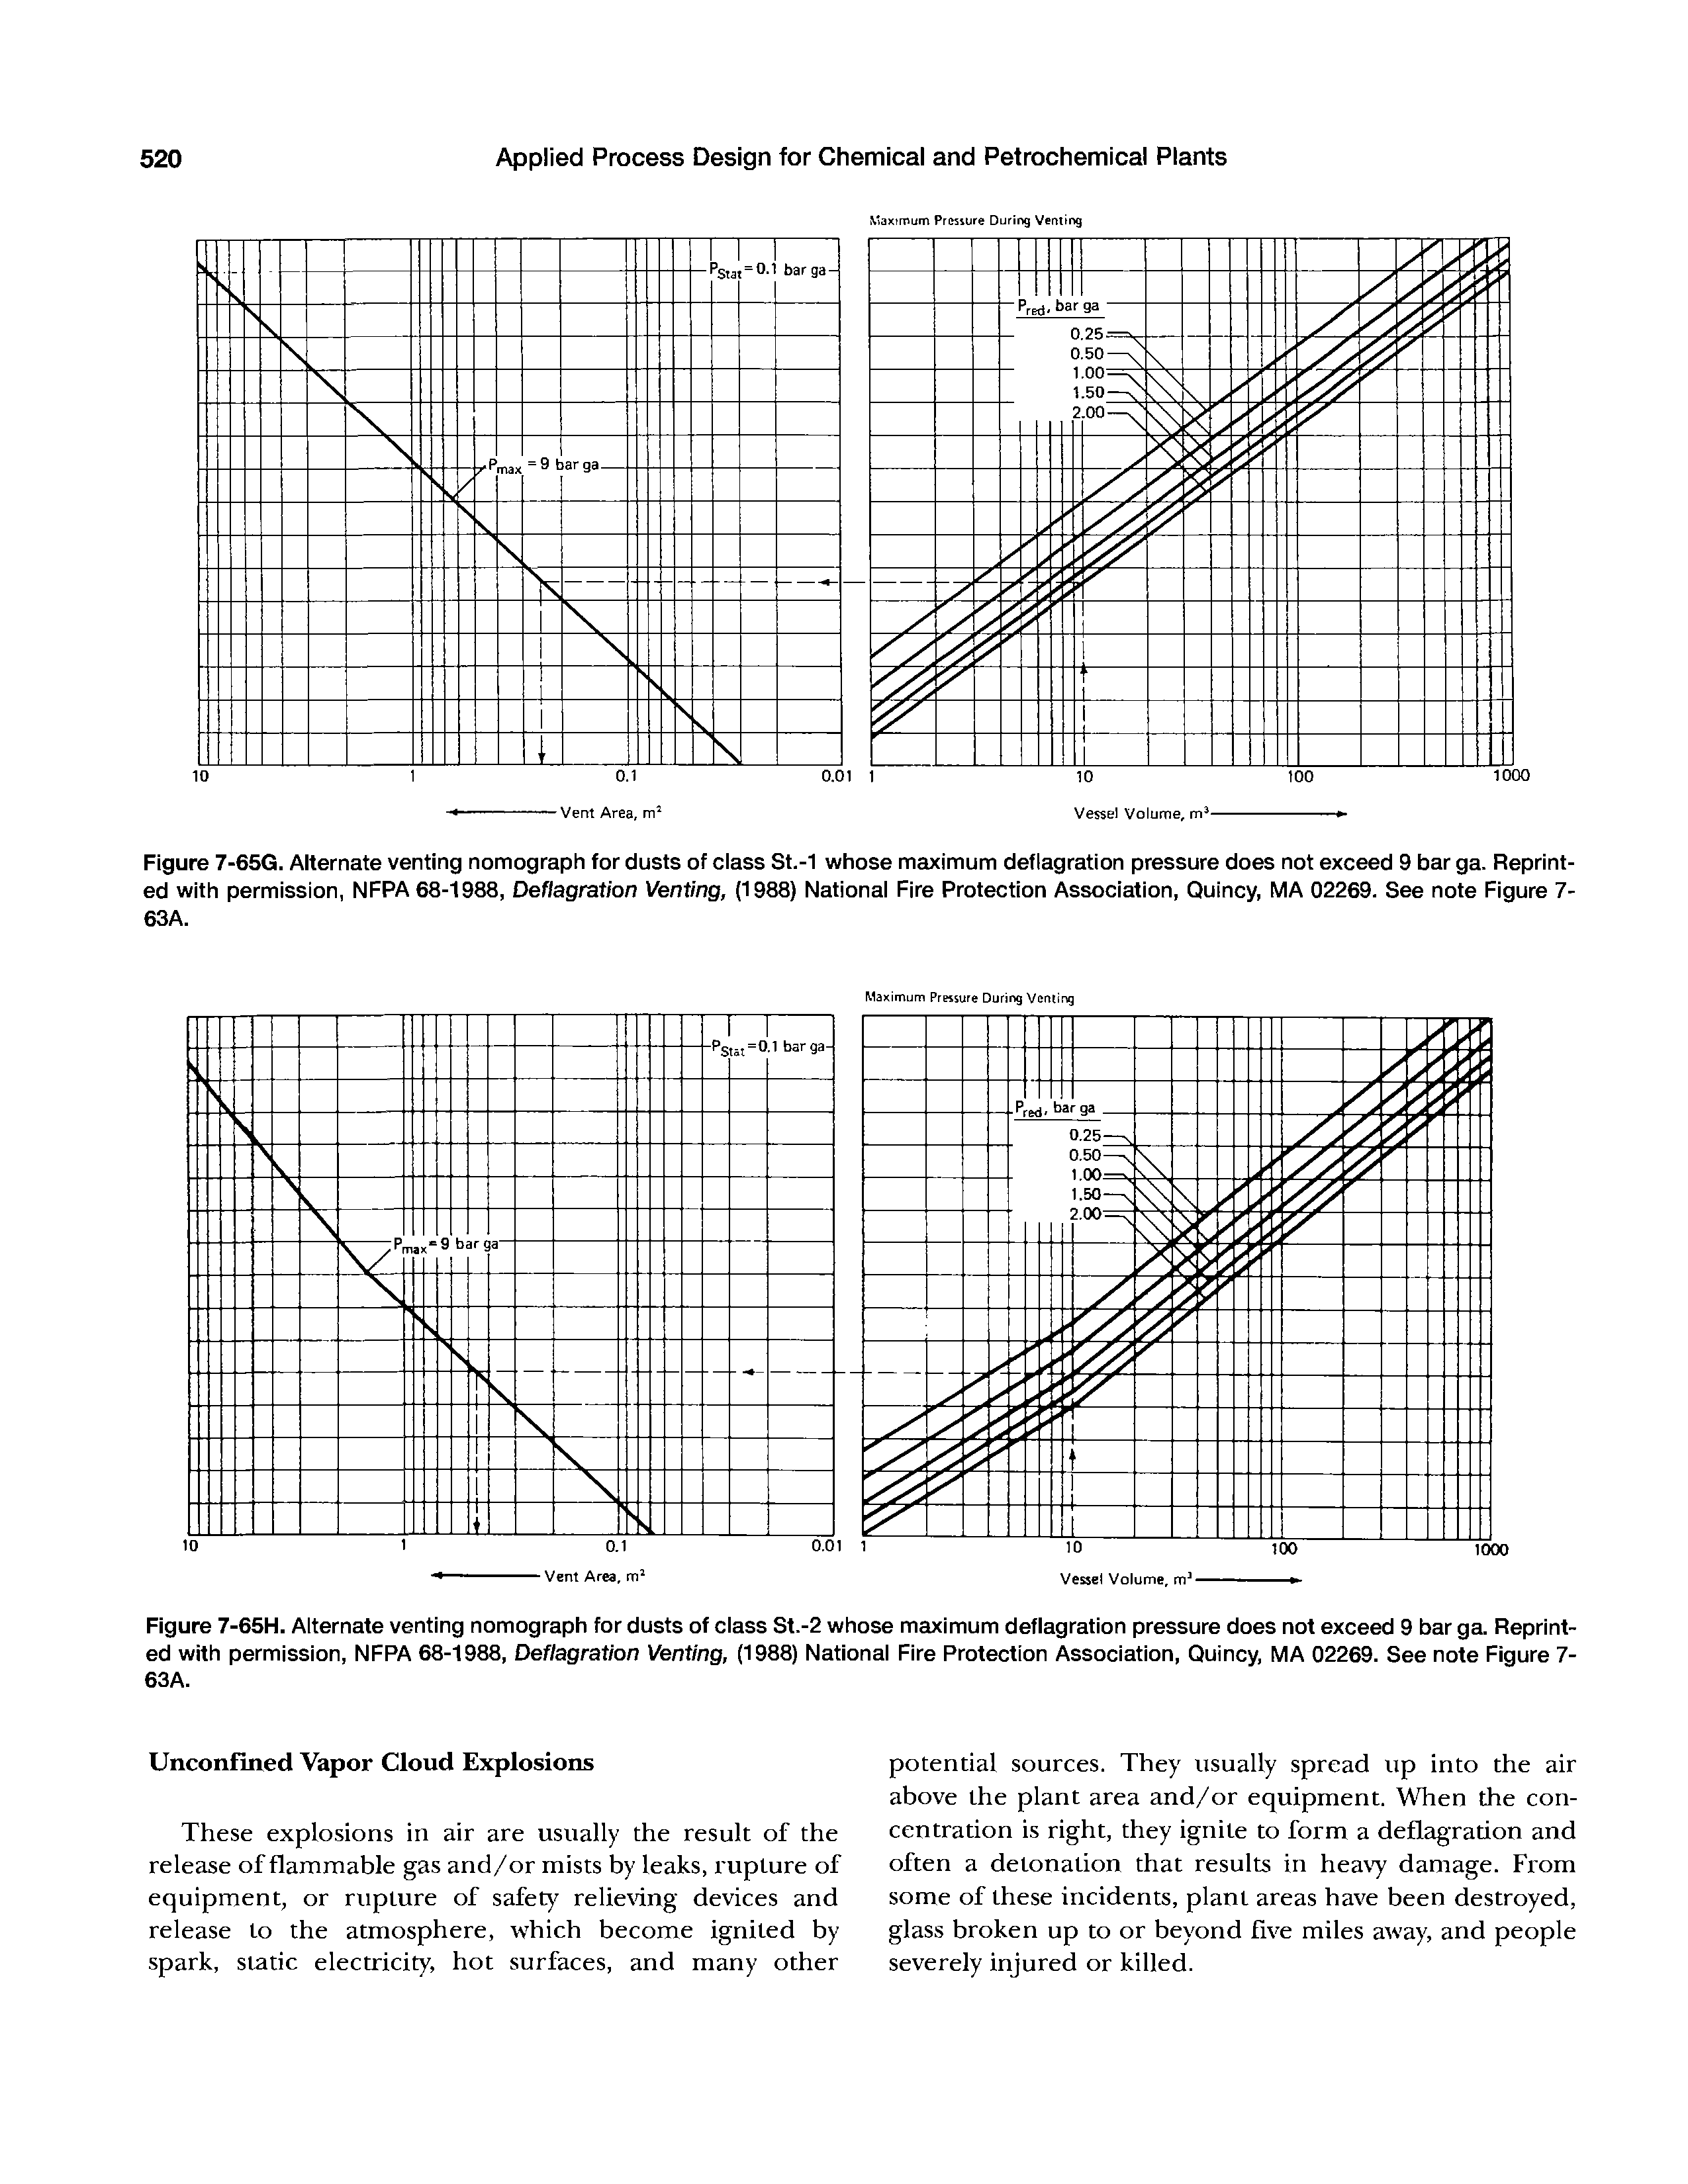 Figure 7-65G. Alternate venting nomograph for dusts of ciass St.-I whose maximum deflagration pressure does not exceed 9 bar ga. Reprinted with permission, NFPA 68-1988, Deflagration Venting, (1988) National Fire Protection Association, Quincy, MA 02269. See note Figure 7-63A.